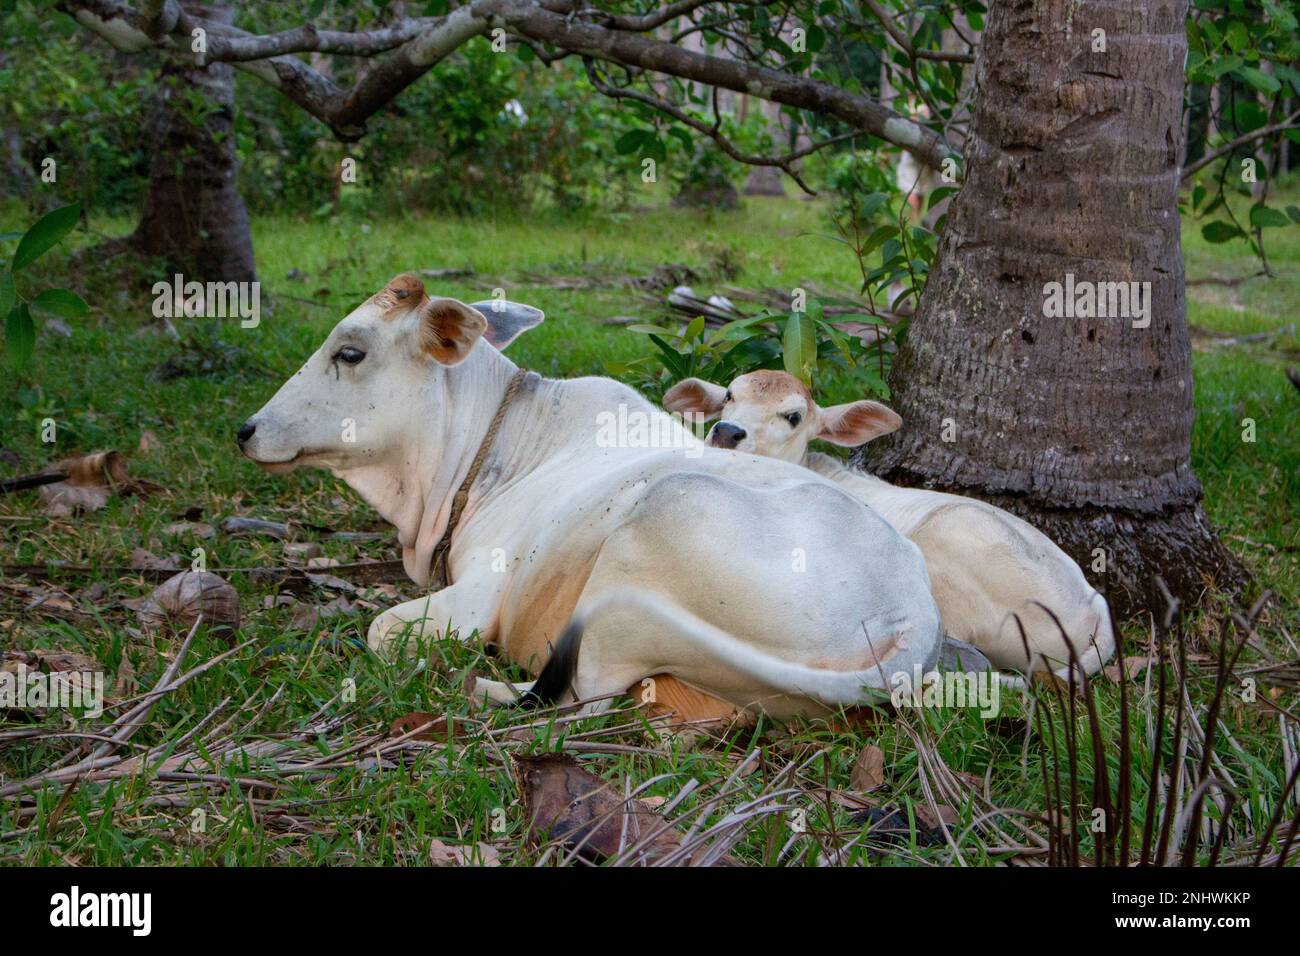 White cow and calf grazing and lying in field. Cattle farm concept. Rural domestic animals. Cow and cute foal at countryside. Sacred indian animals Stock Photo